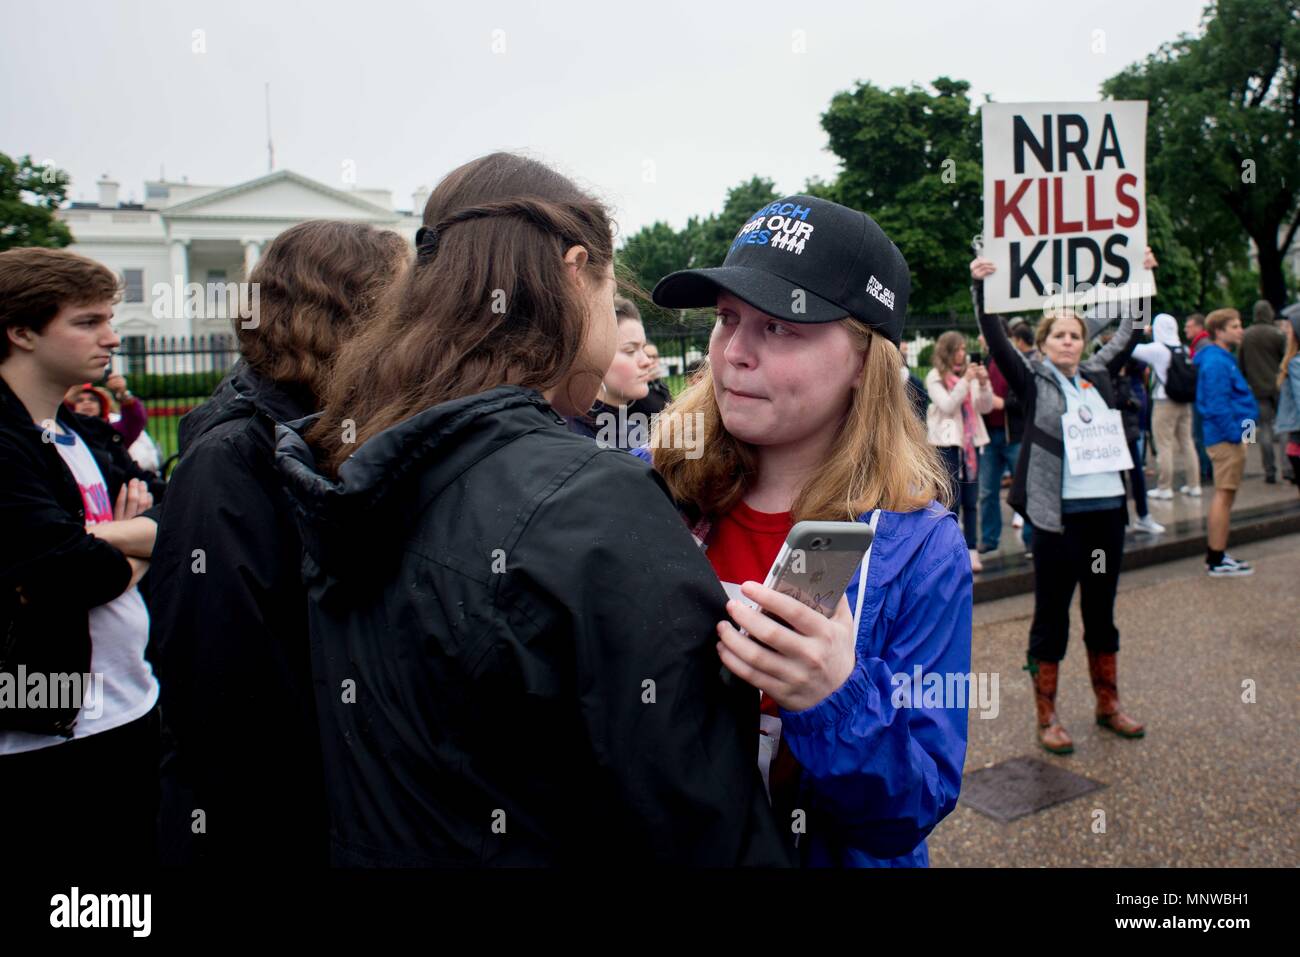 Washington, District of Columbia, USA. 19th May, 2018. A student organizer becomes emotional while demonstrating at a ''lie-in'' in front of the White House to honor the victims of the Santa Fe High School shooting in Texas. The group is demanding the U.S. president and Congress work to pass gun control legislation. Credit: Erin Scott/ZUMA Wire/Alamy Live News Stock Photo